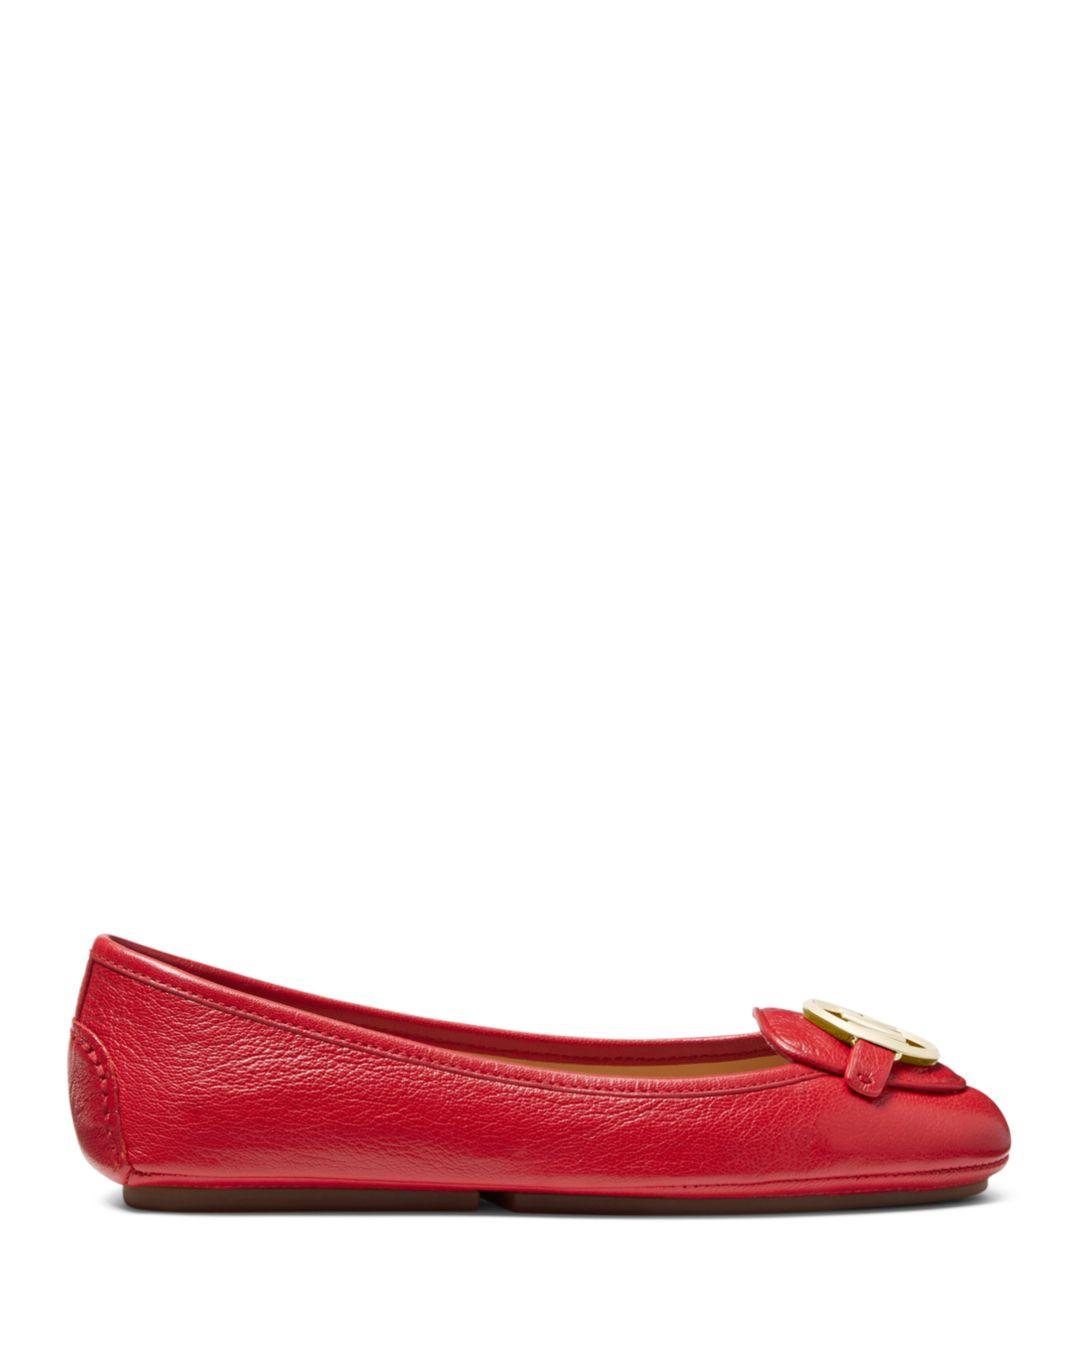 MICHAEL Michael Kors Women's Lillie Embellished Moccasin Flats in Red | Lyst